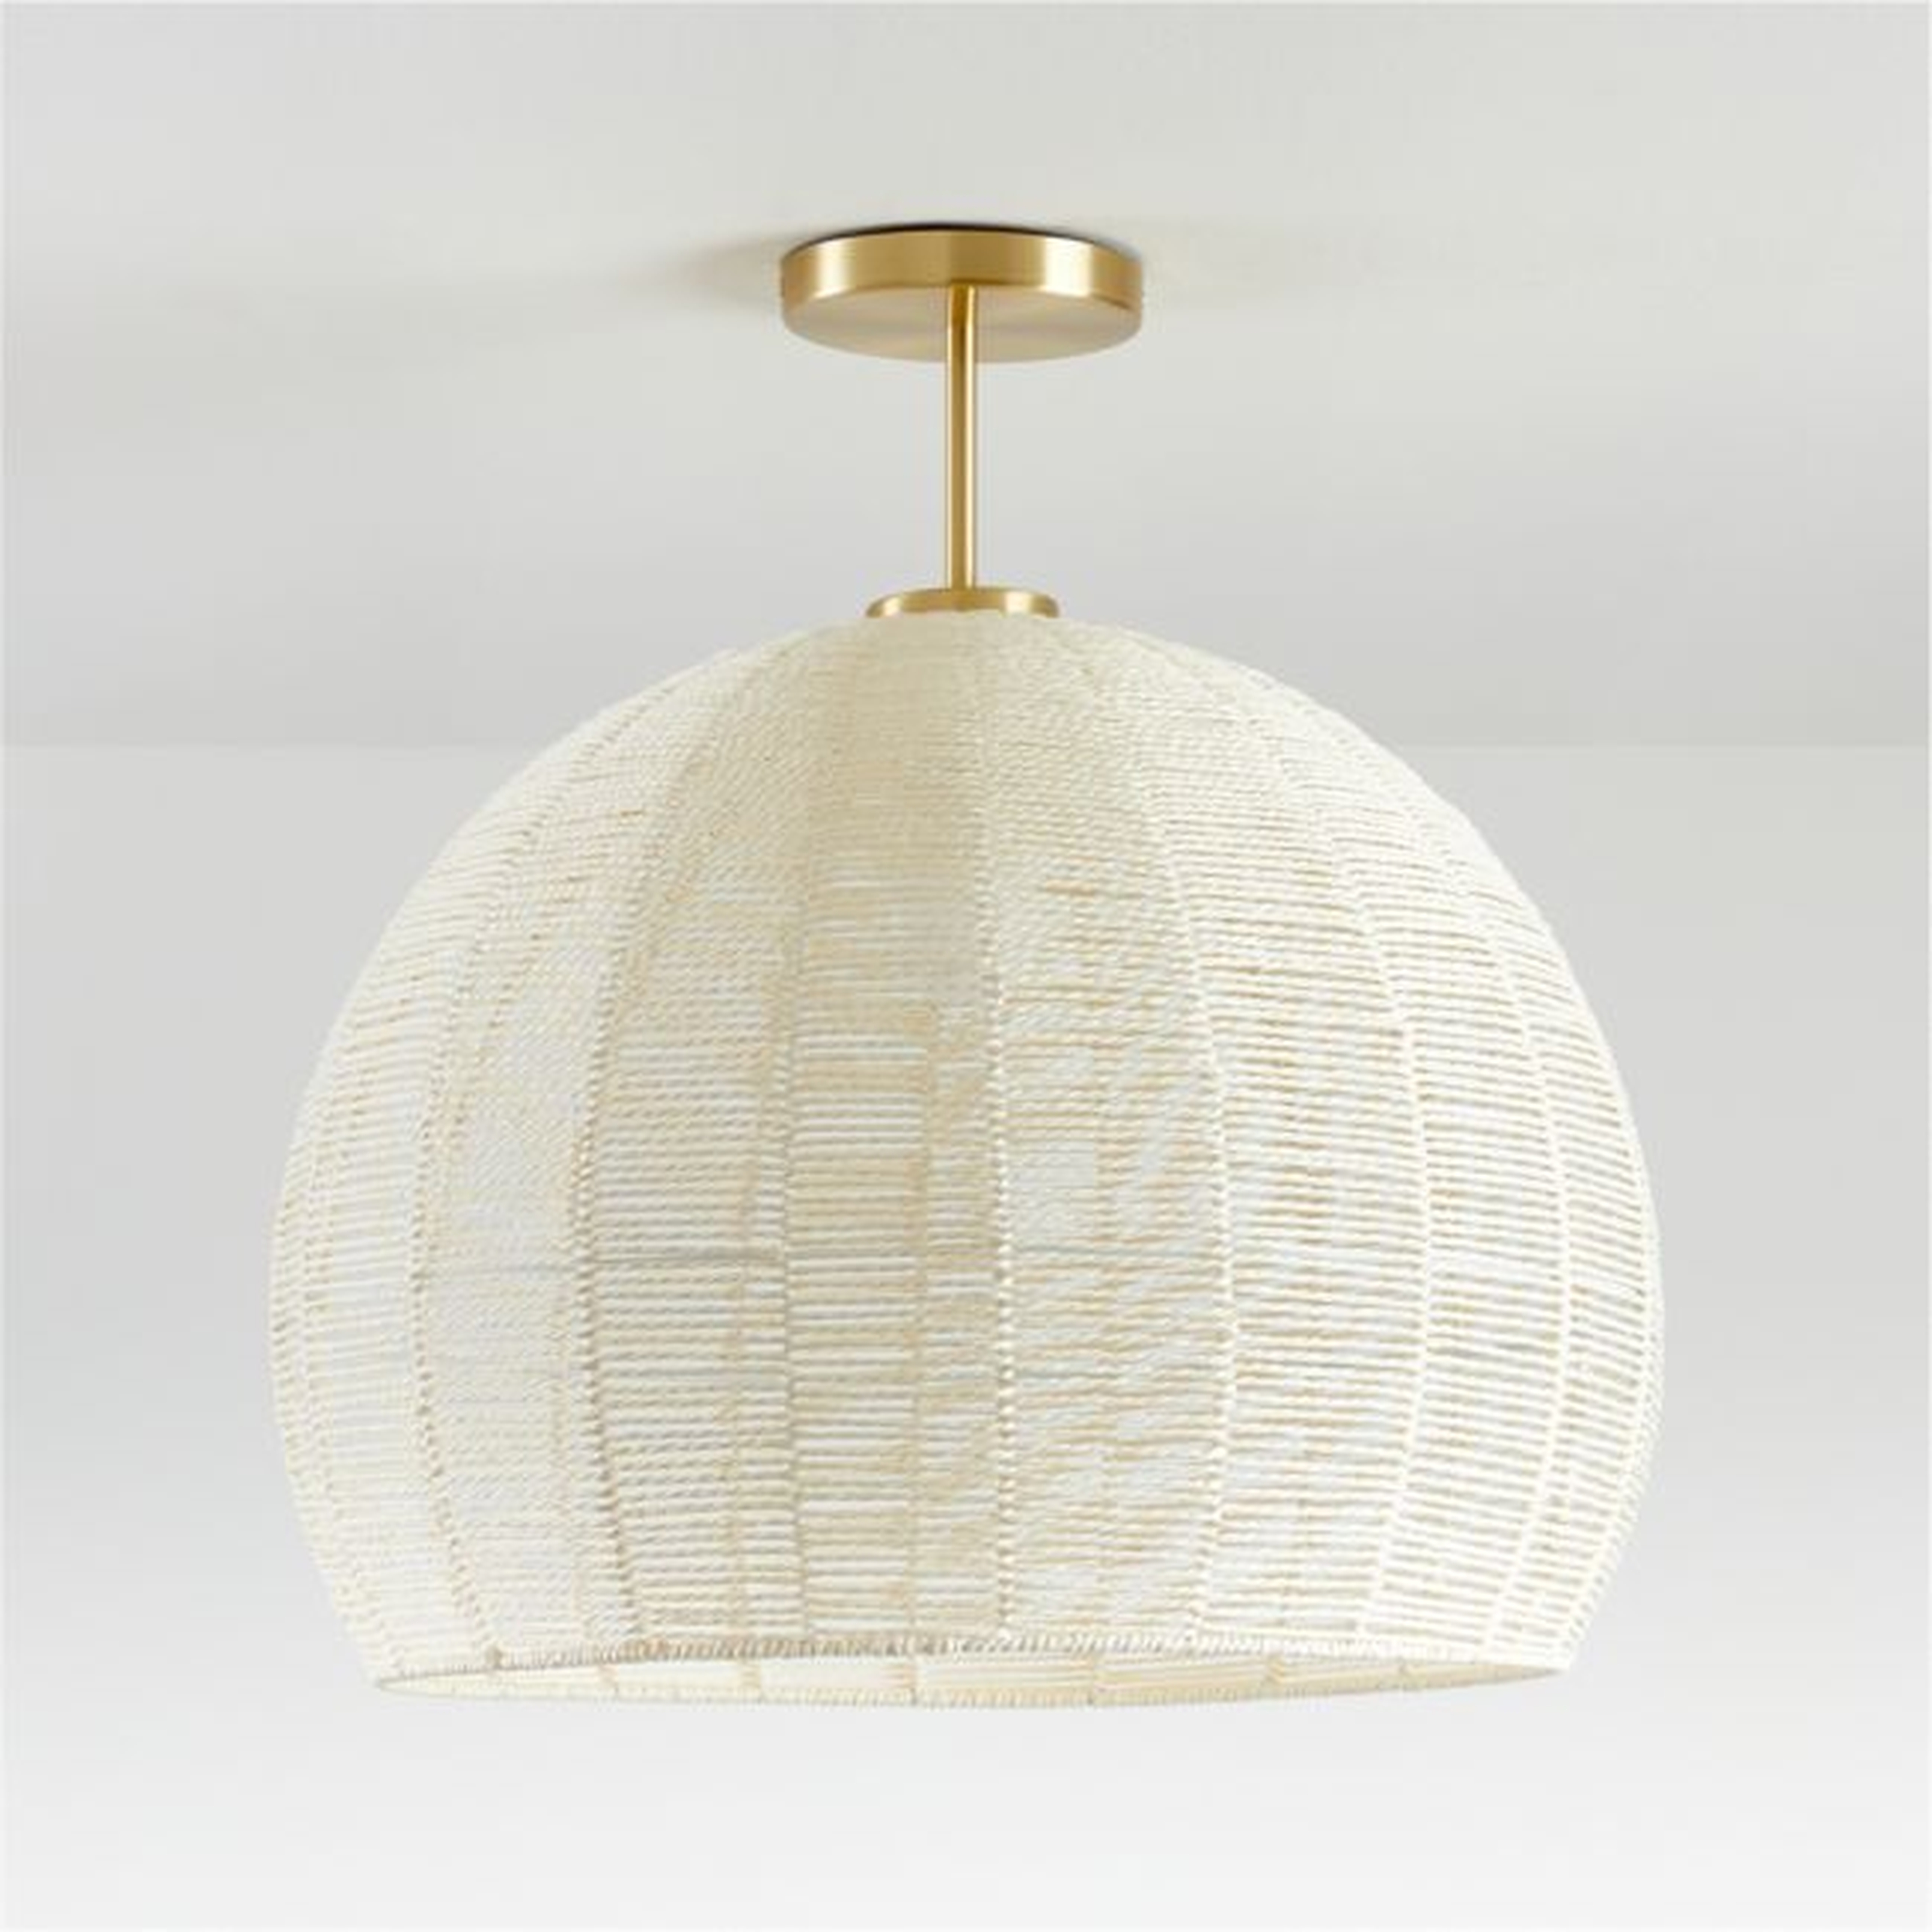 Cream Woven Rope Flush Mount Light - Crate and Barrel